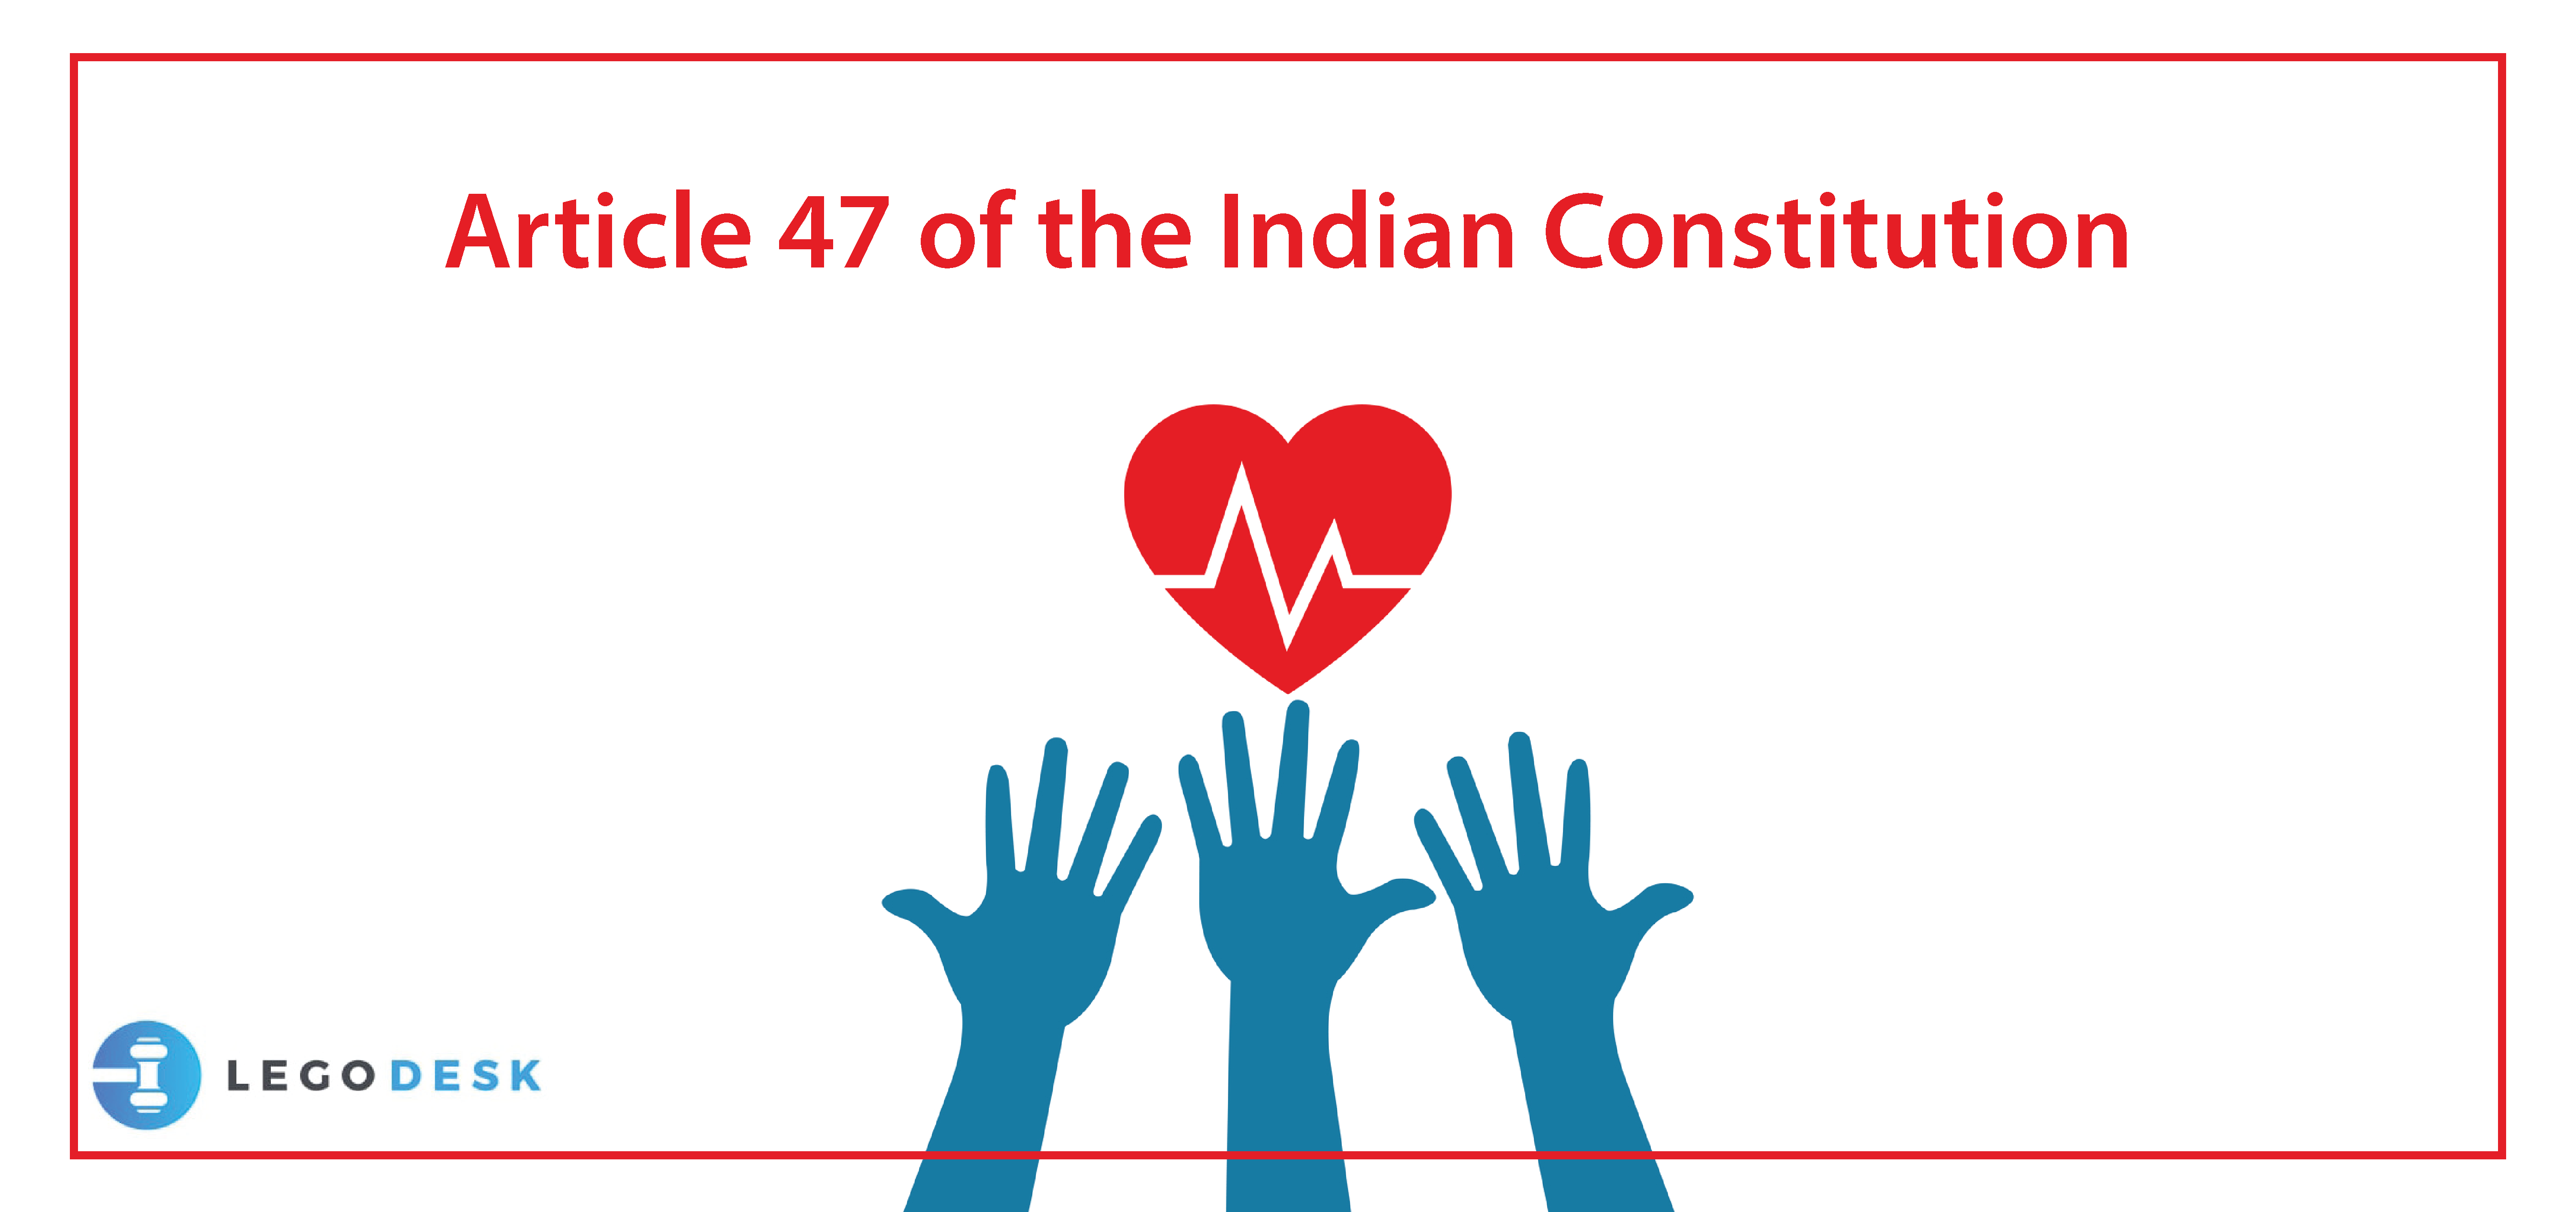 Article 47 of the Indian Constitution